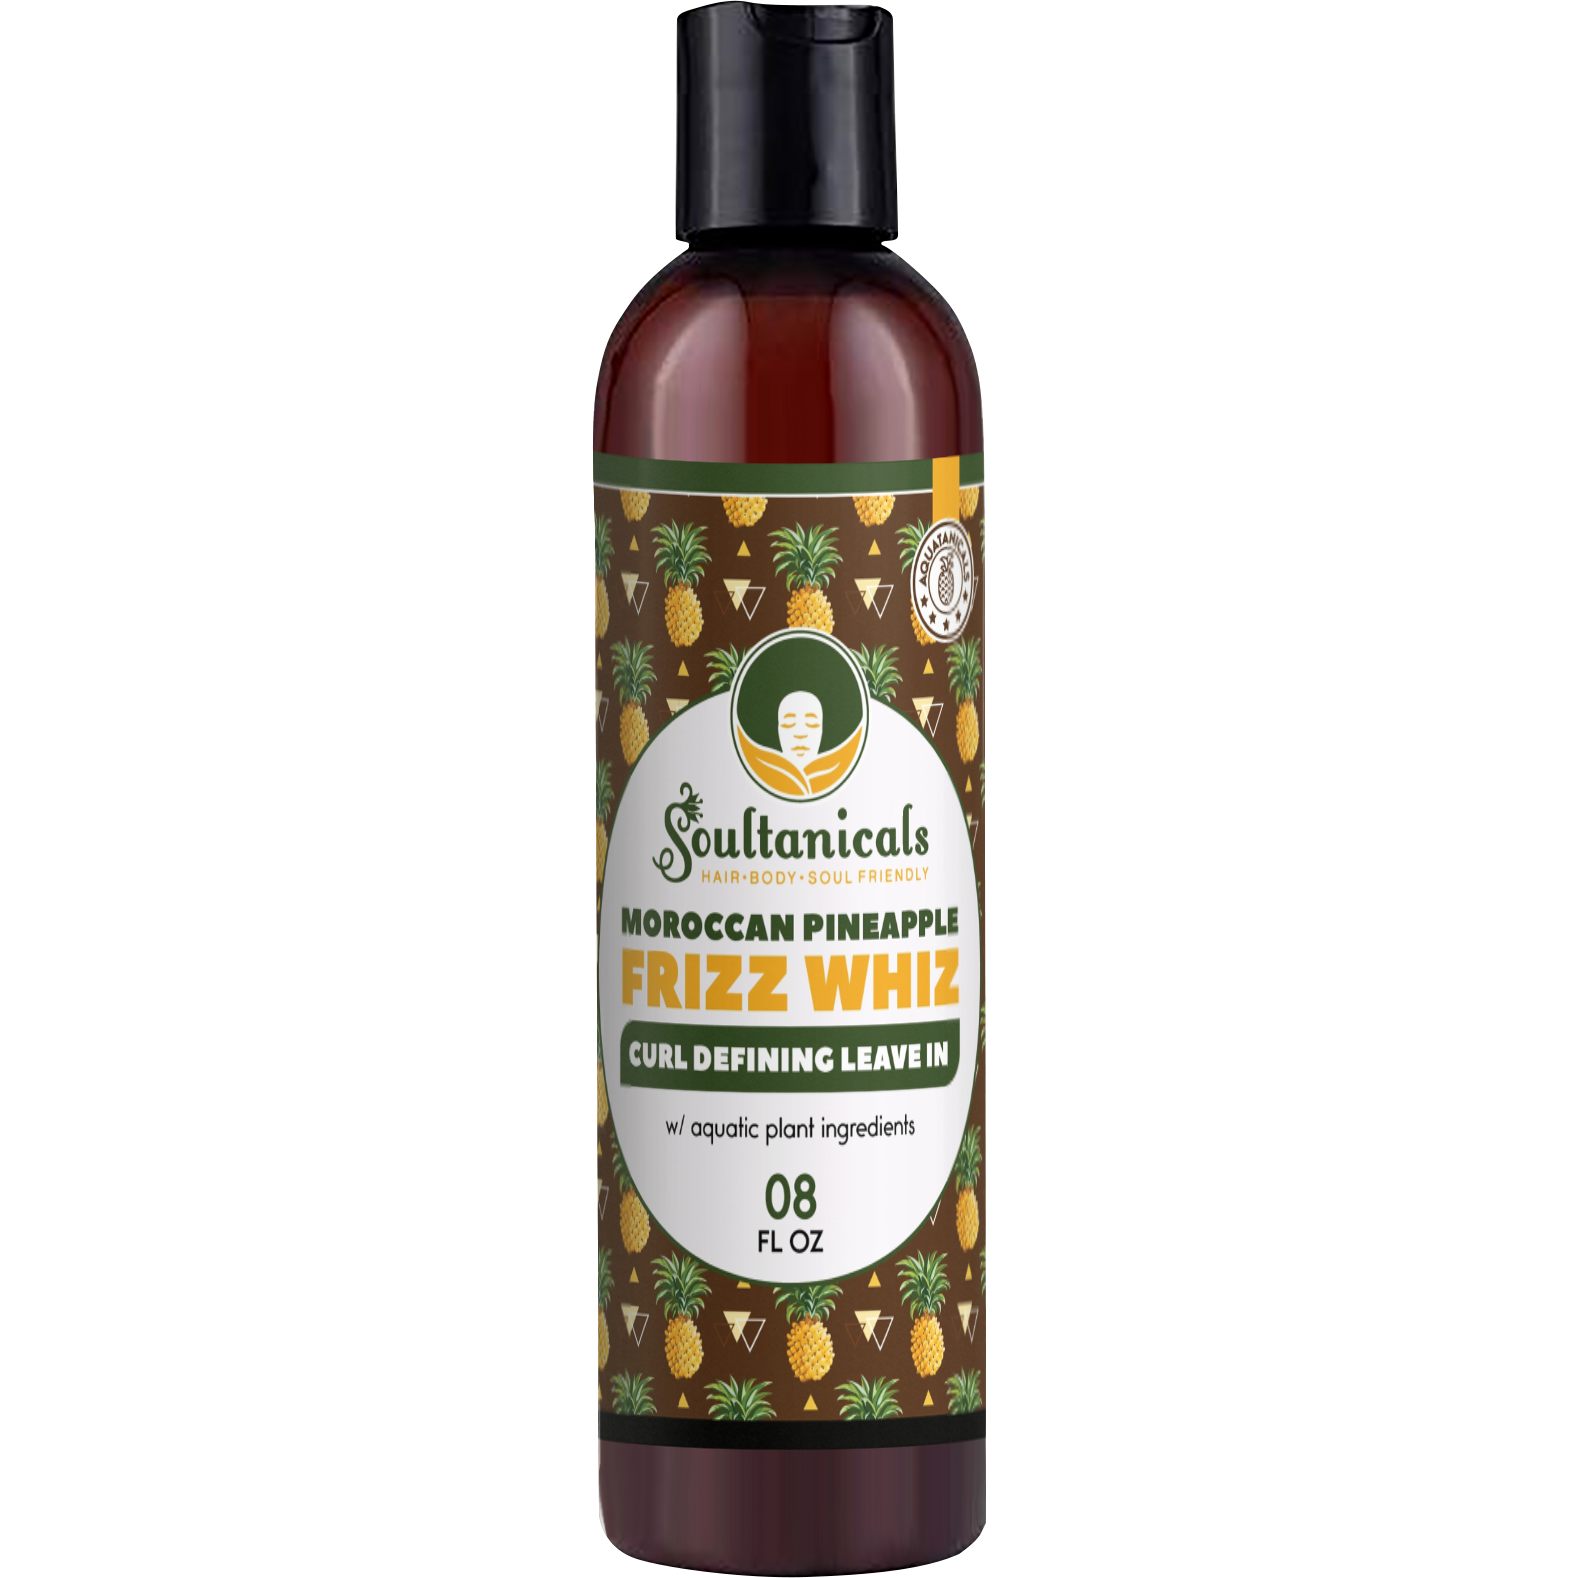 AQUATANICALS- Moroccan Pineapple Frizz Whiz, Curl Defining Leave-In